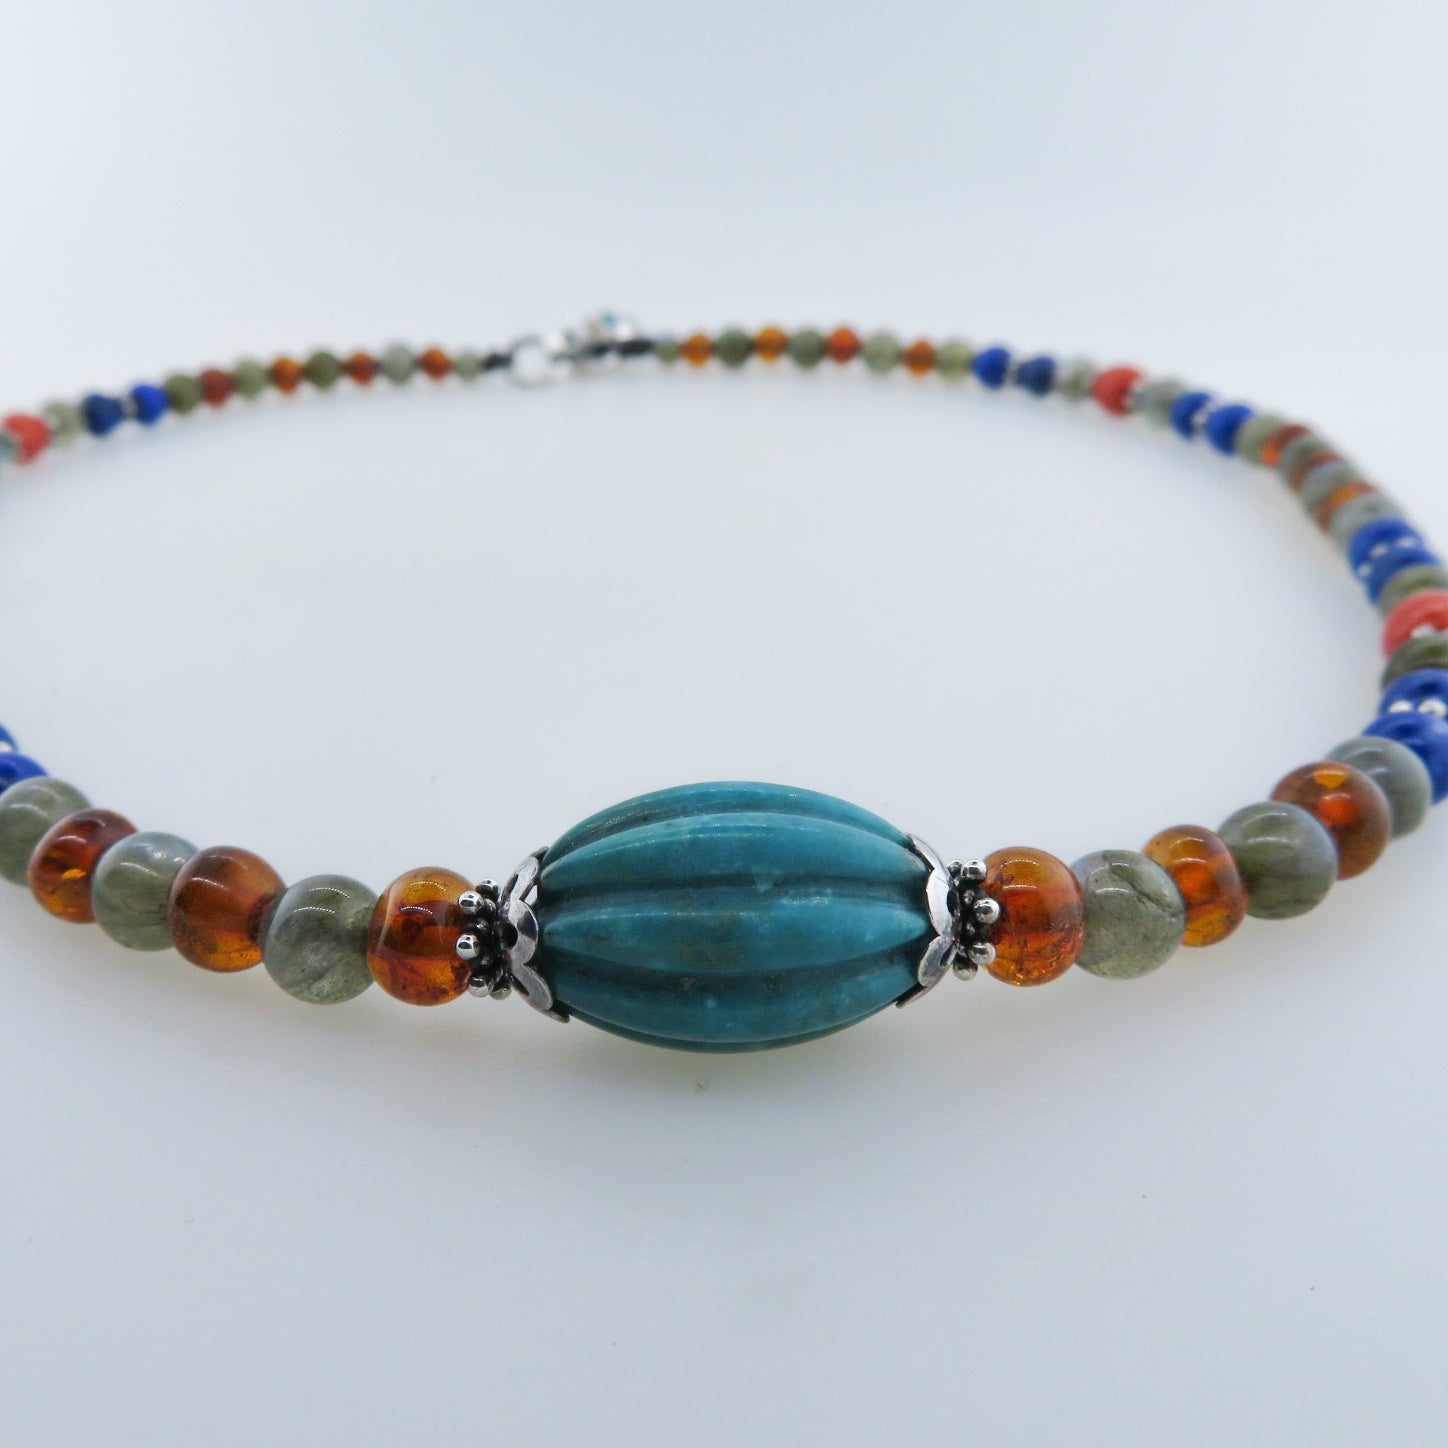 Mixed Stone Beads (Turquoise, Amber, Labradorite, Lapis Lazuli, Italian Red Coral) with Silver Beads